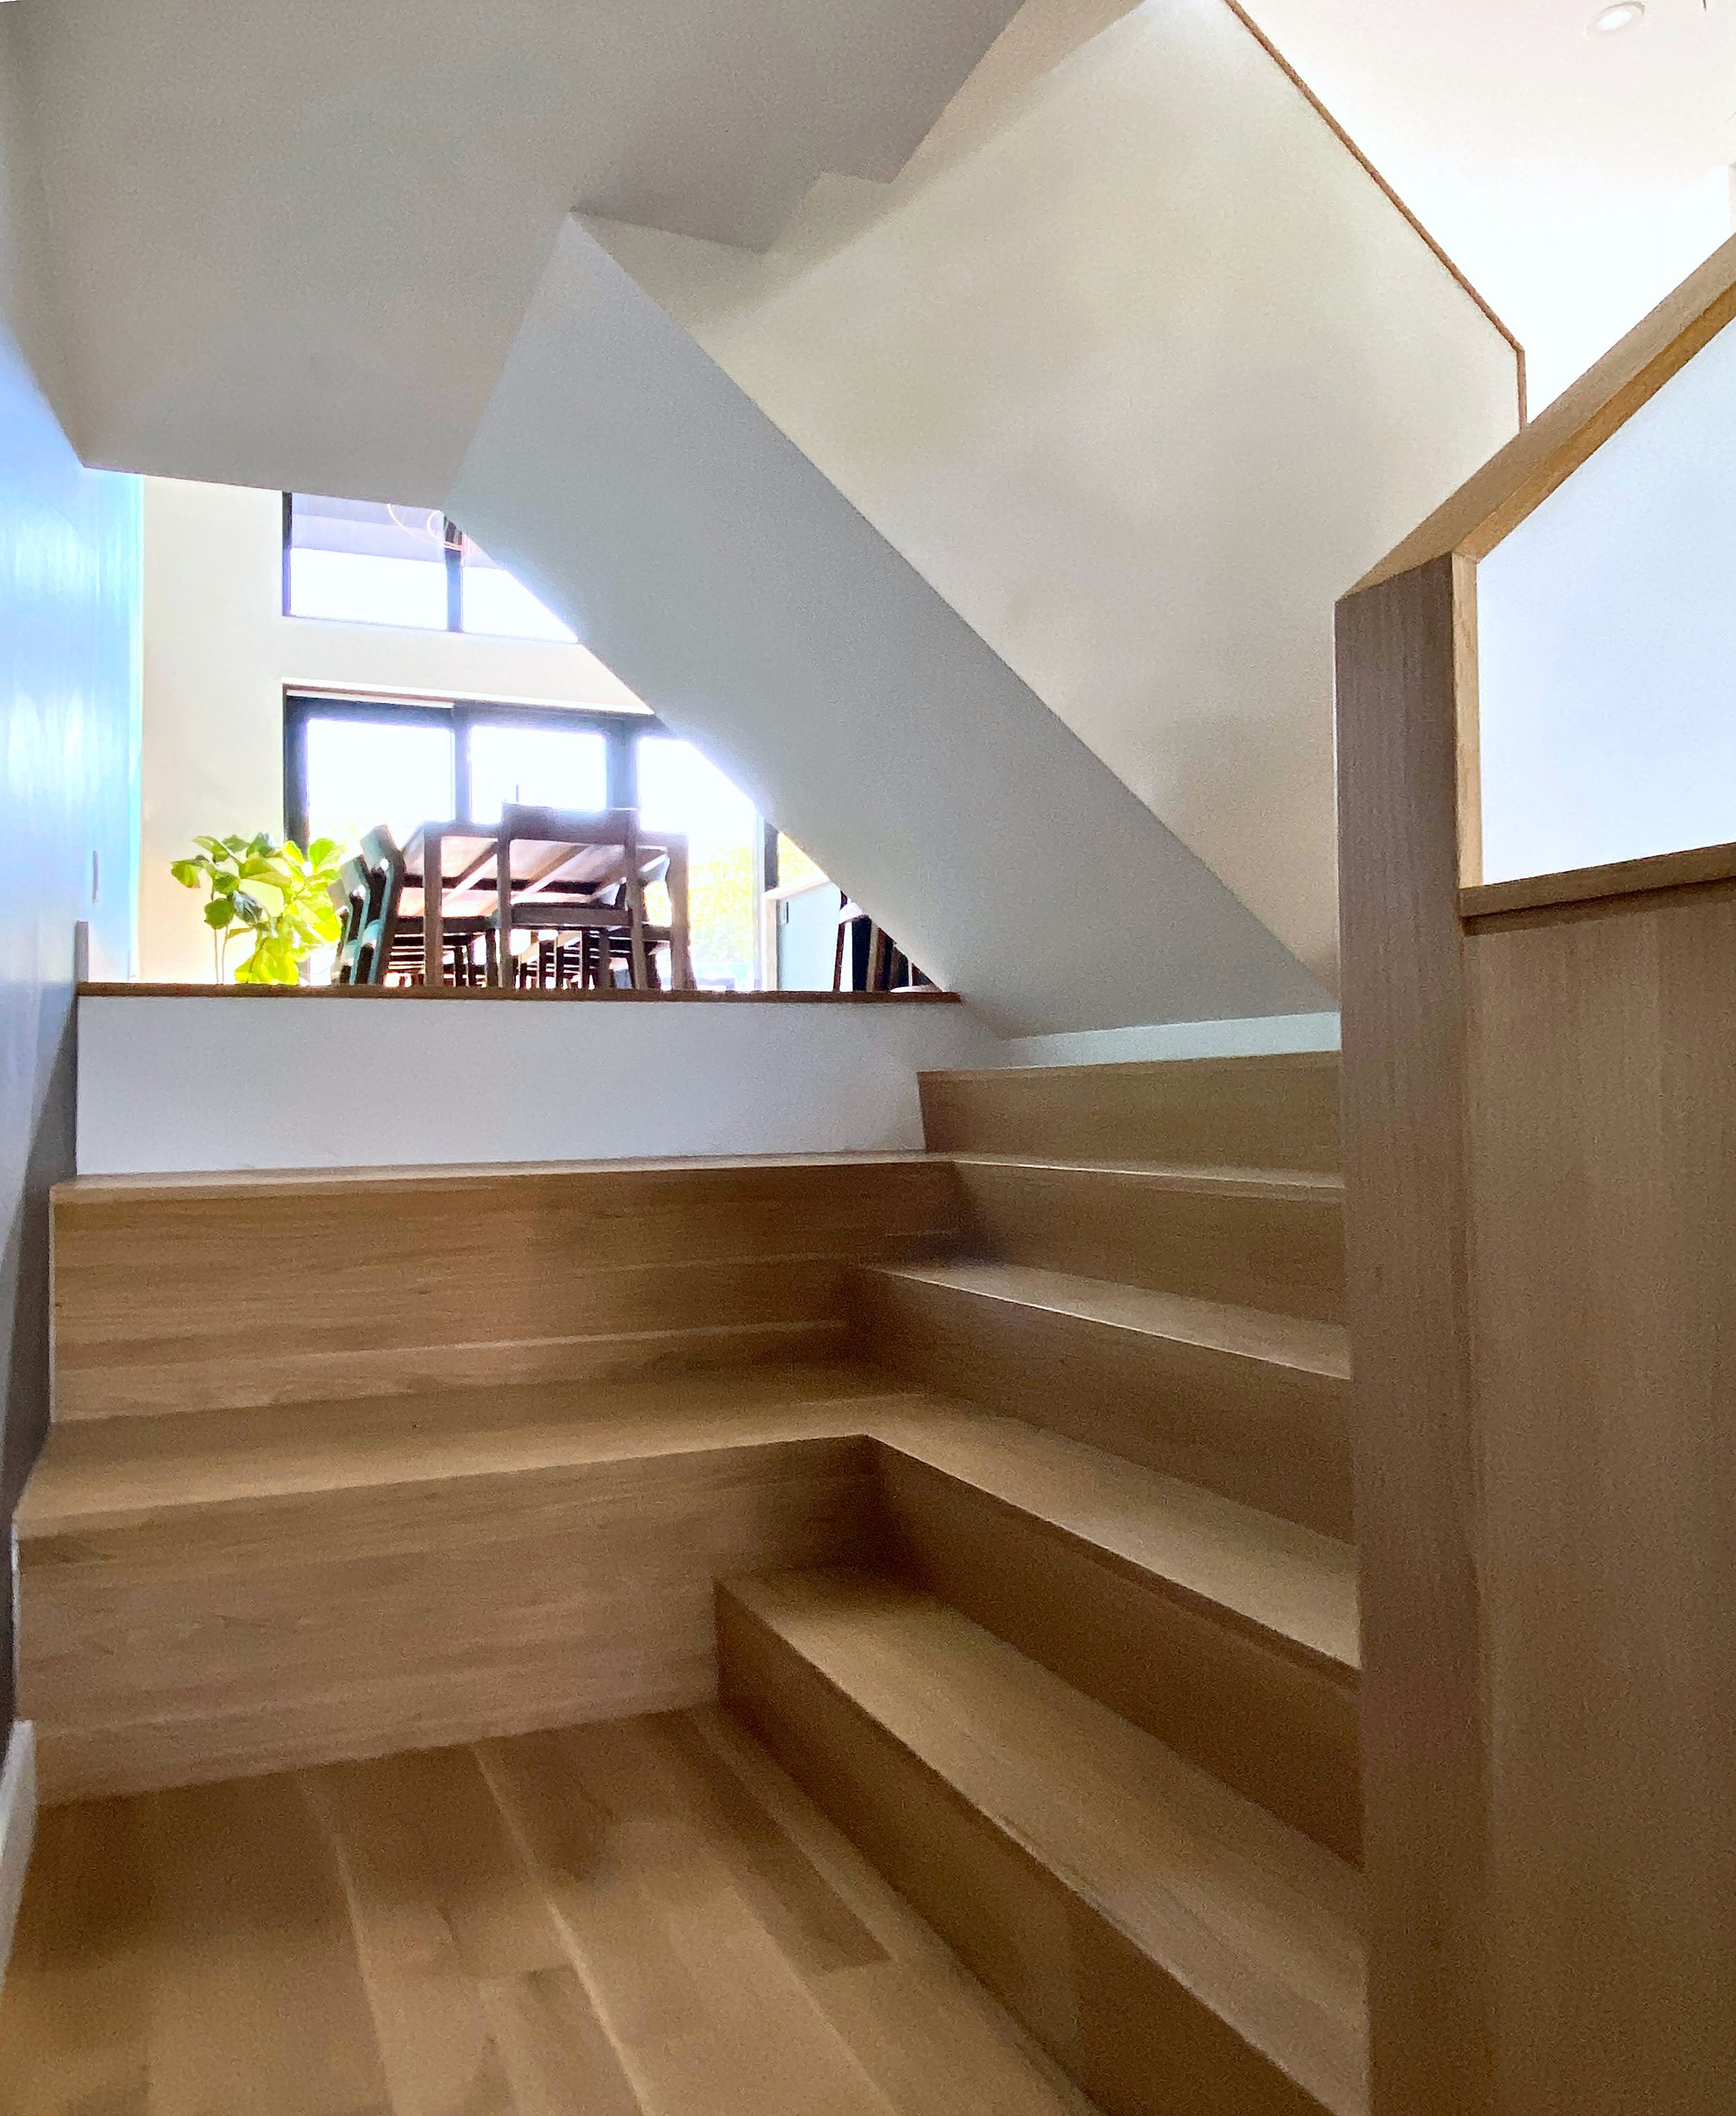 Williamsburg Townhouse stair seating